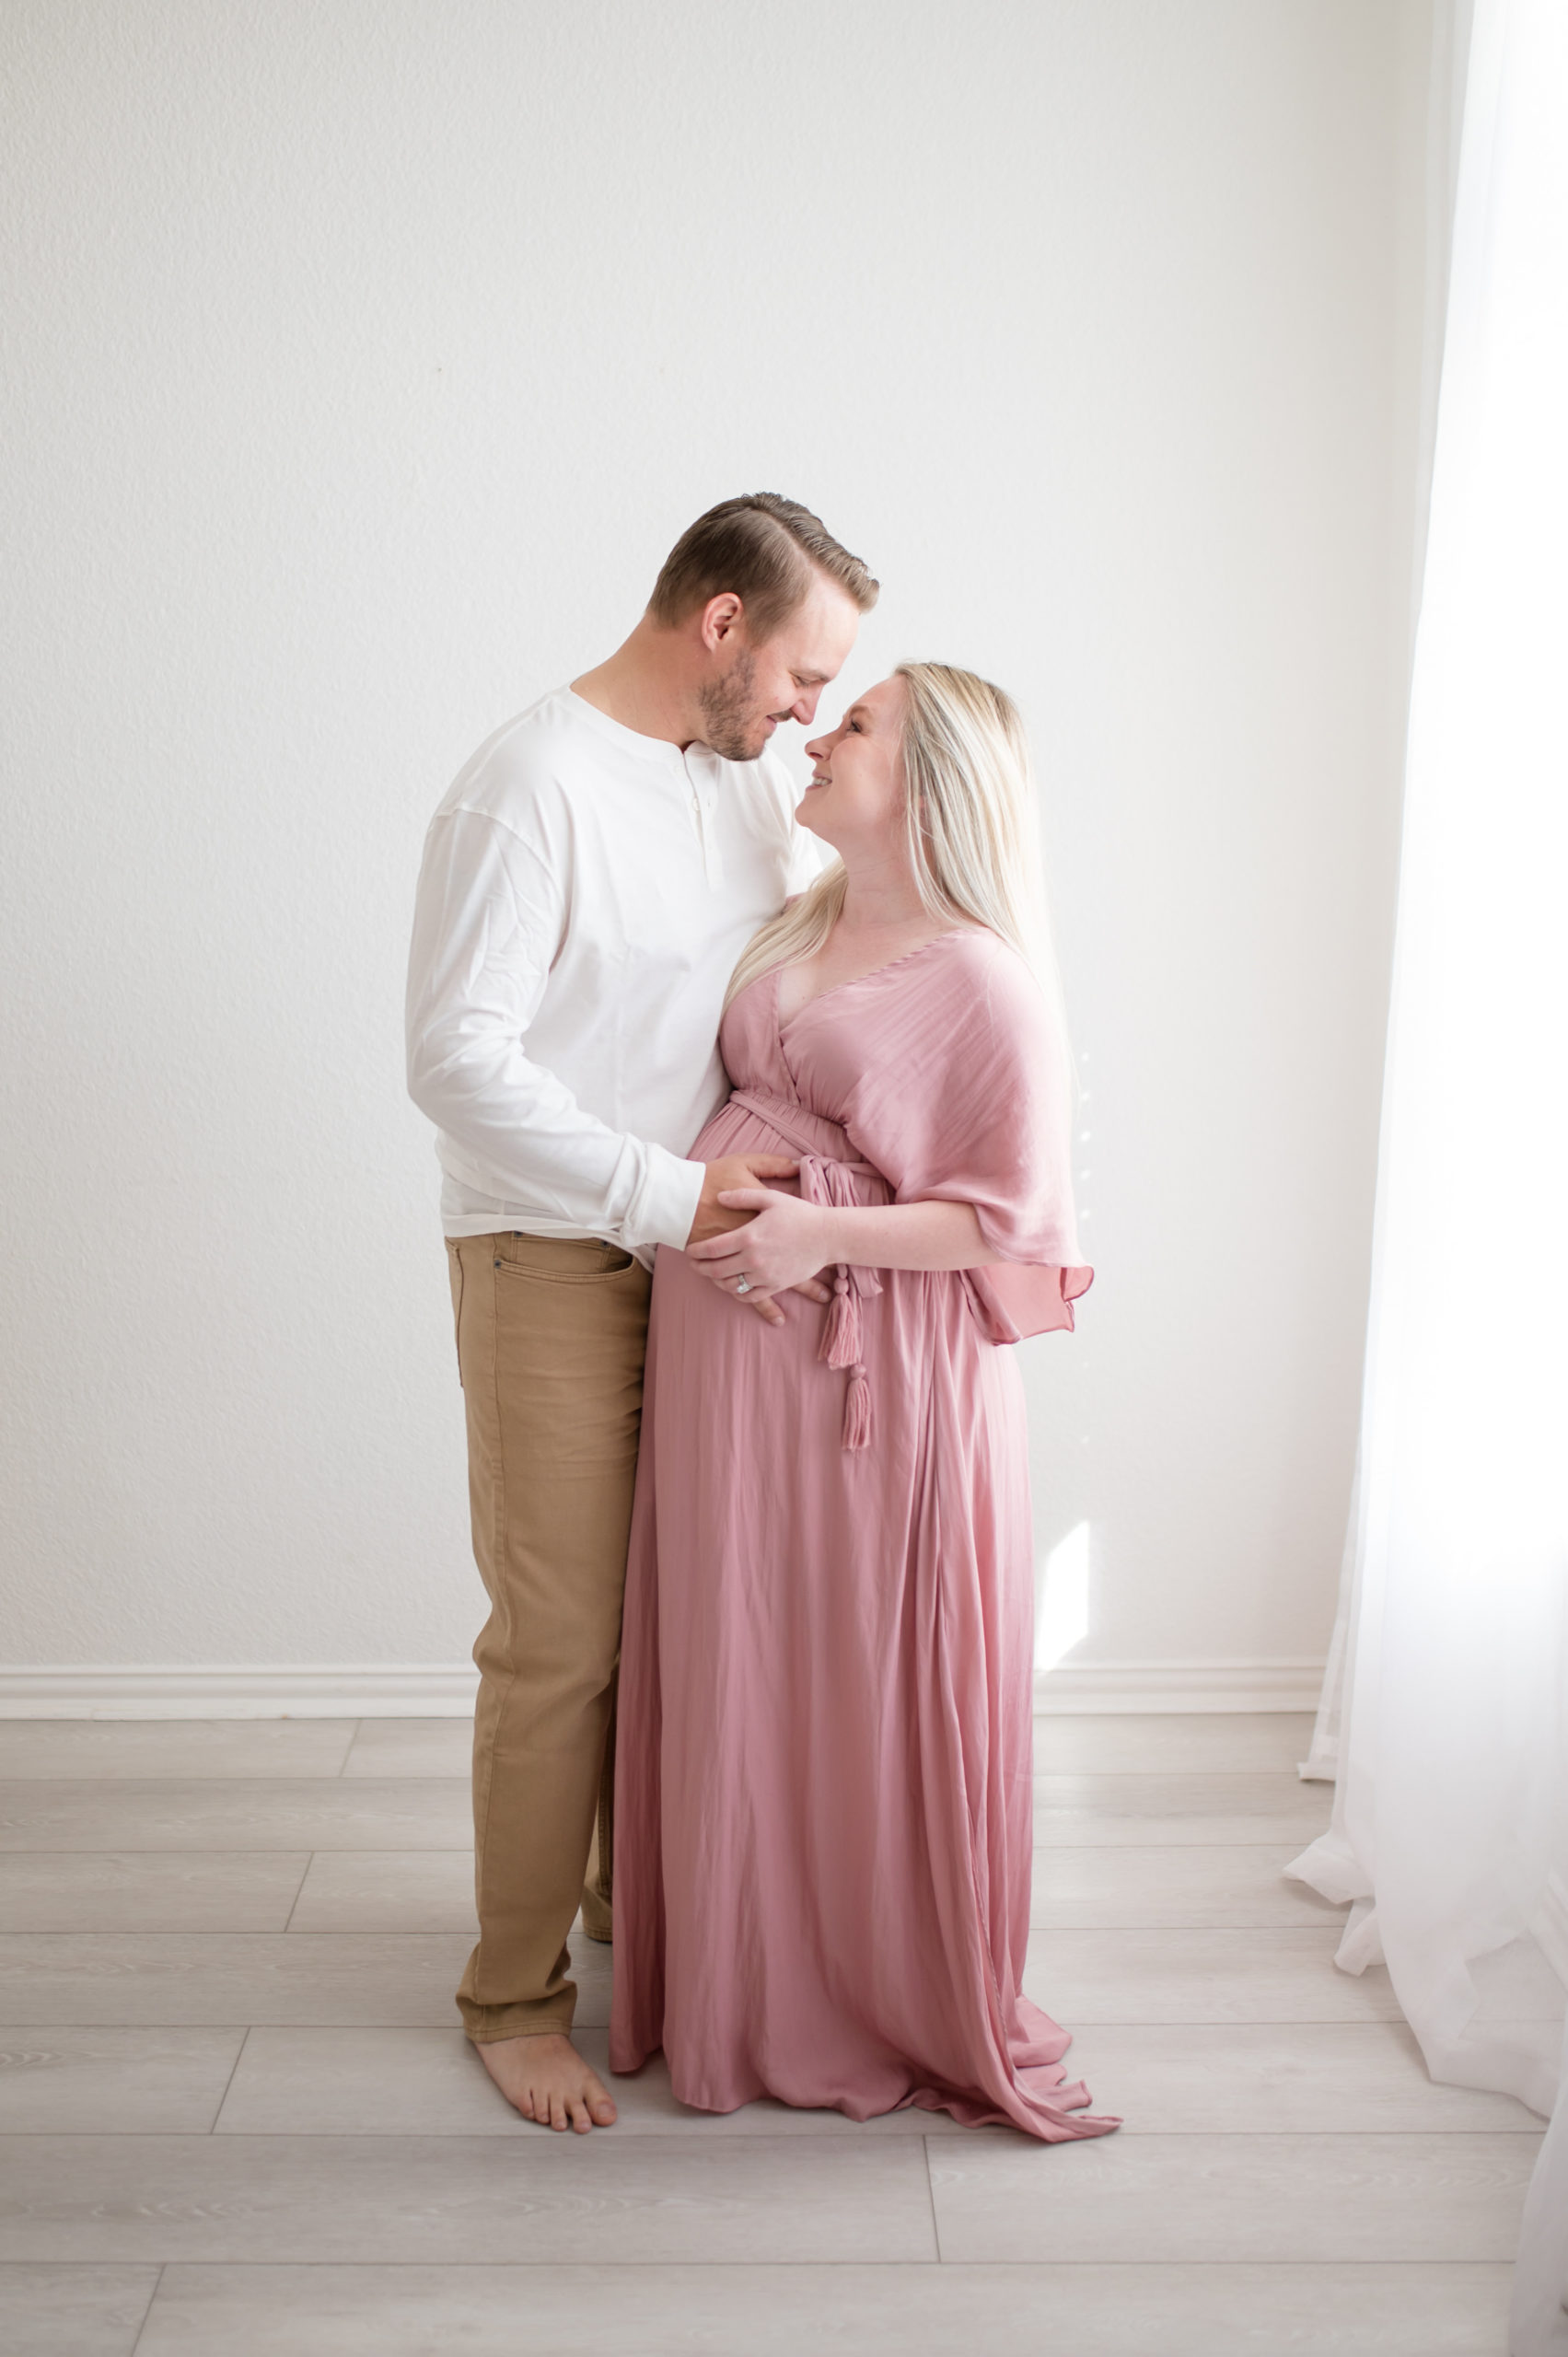 Pregnant mom and dad nose to nose holding belly photographed by Dallas newborn photographer, Lindsey Dutton Photography